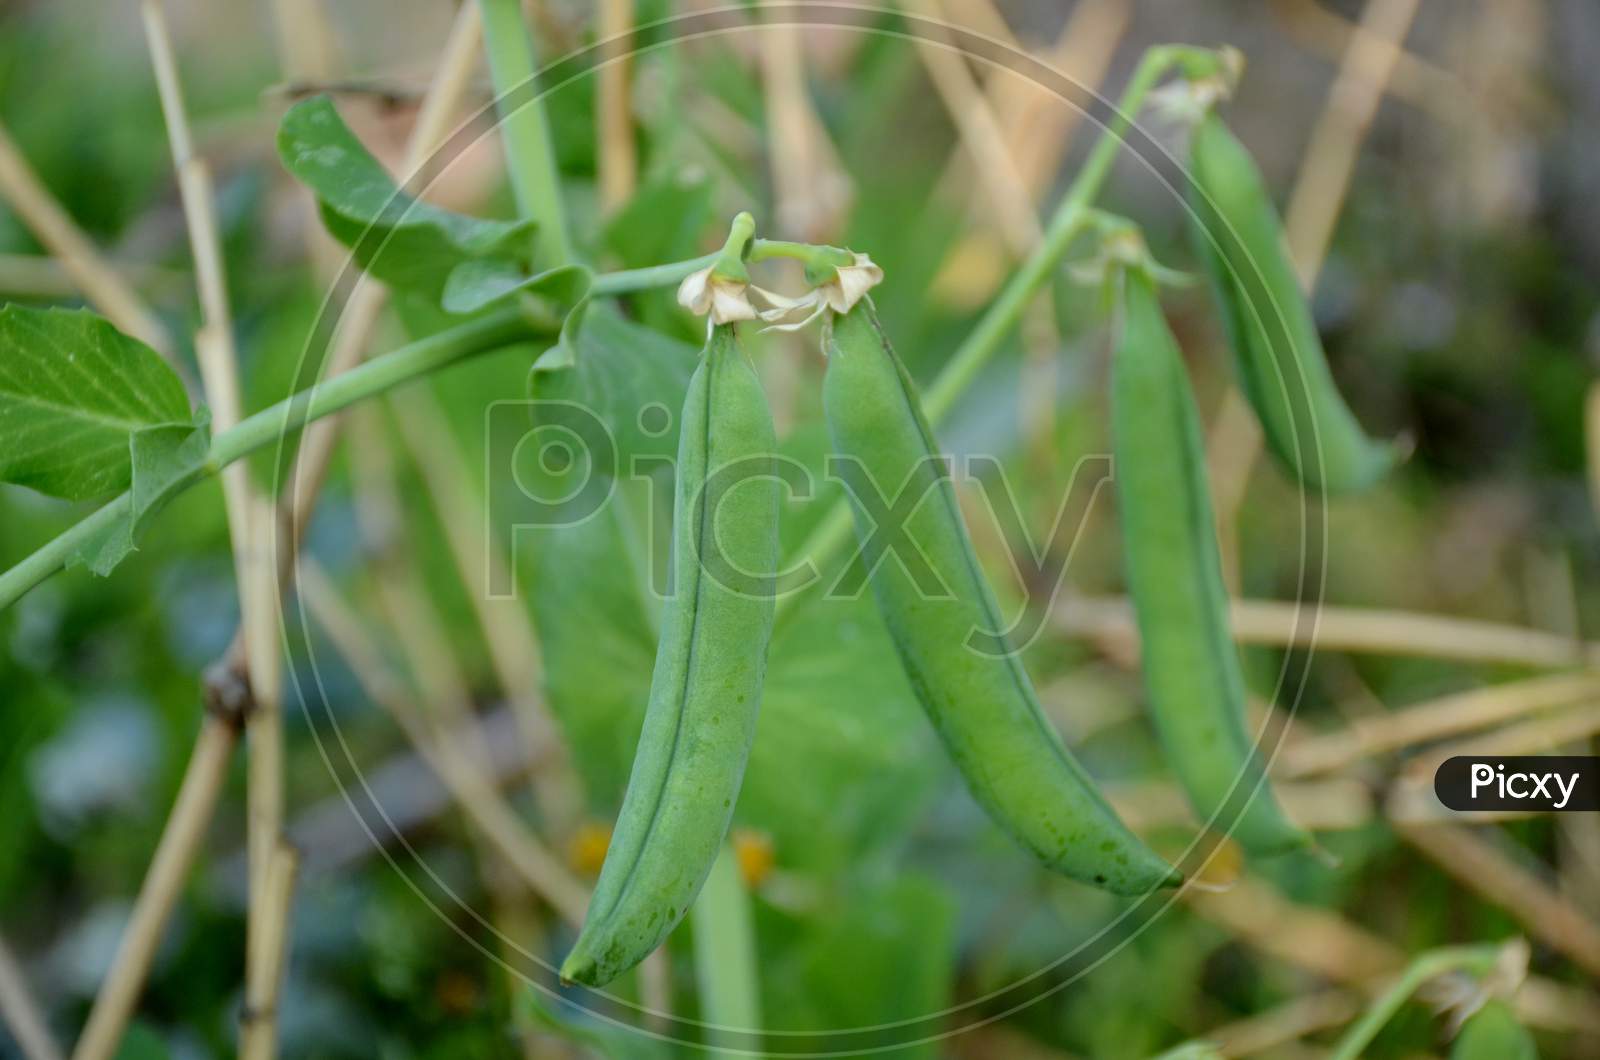 The Ripe Green Peas With Plant Growing In The Garden.